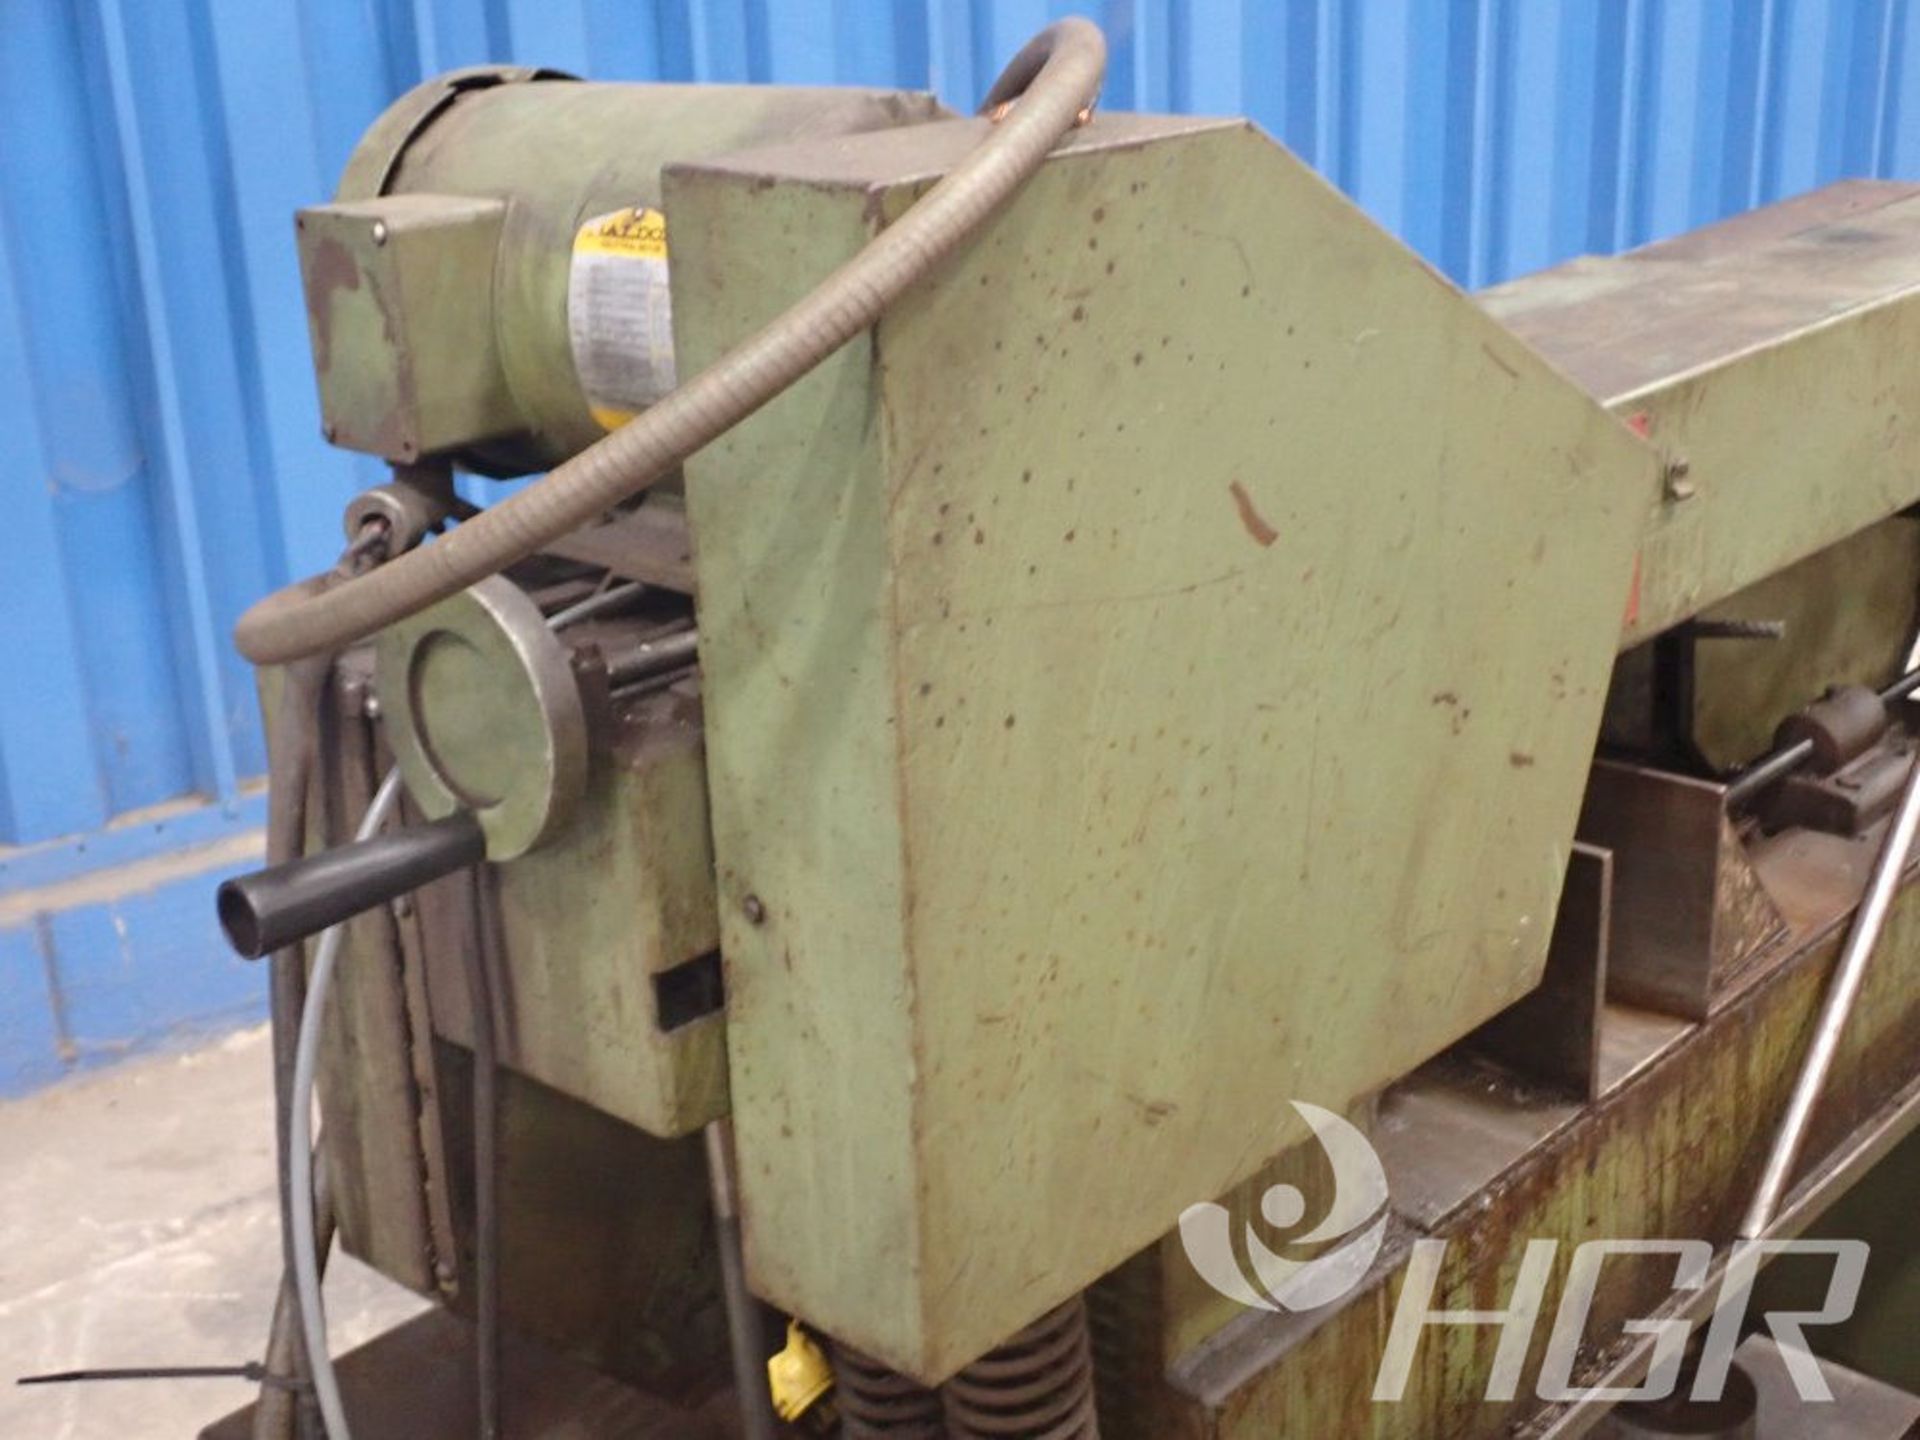 DO ALL HORIZONTAL BANDSAW, Model C-4, Date: n/a; s/n 234-773309, Approx. Capacity: 18", Power: 3/ - Image 5 of 19